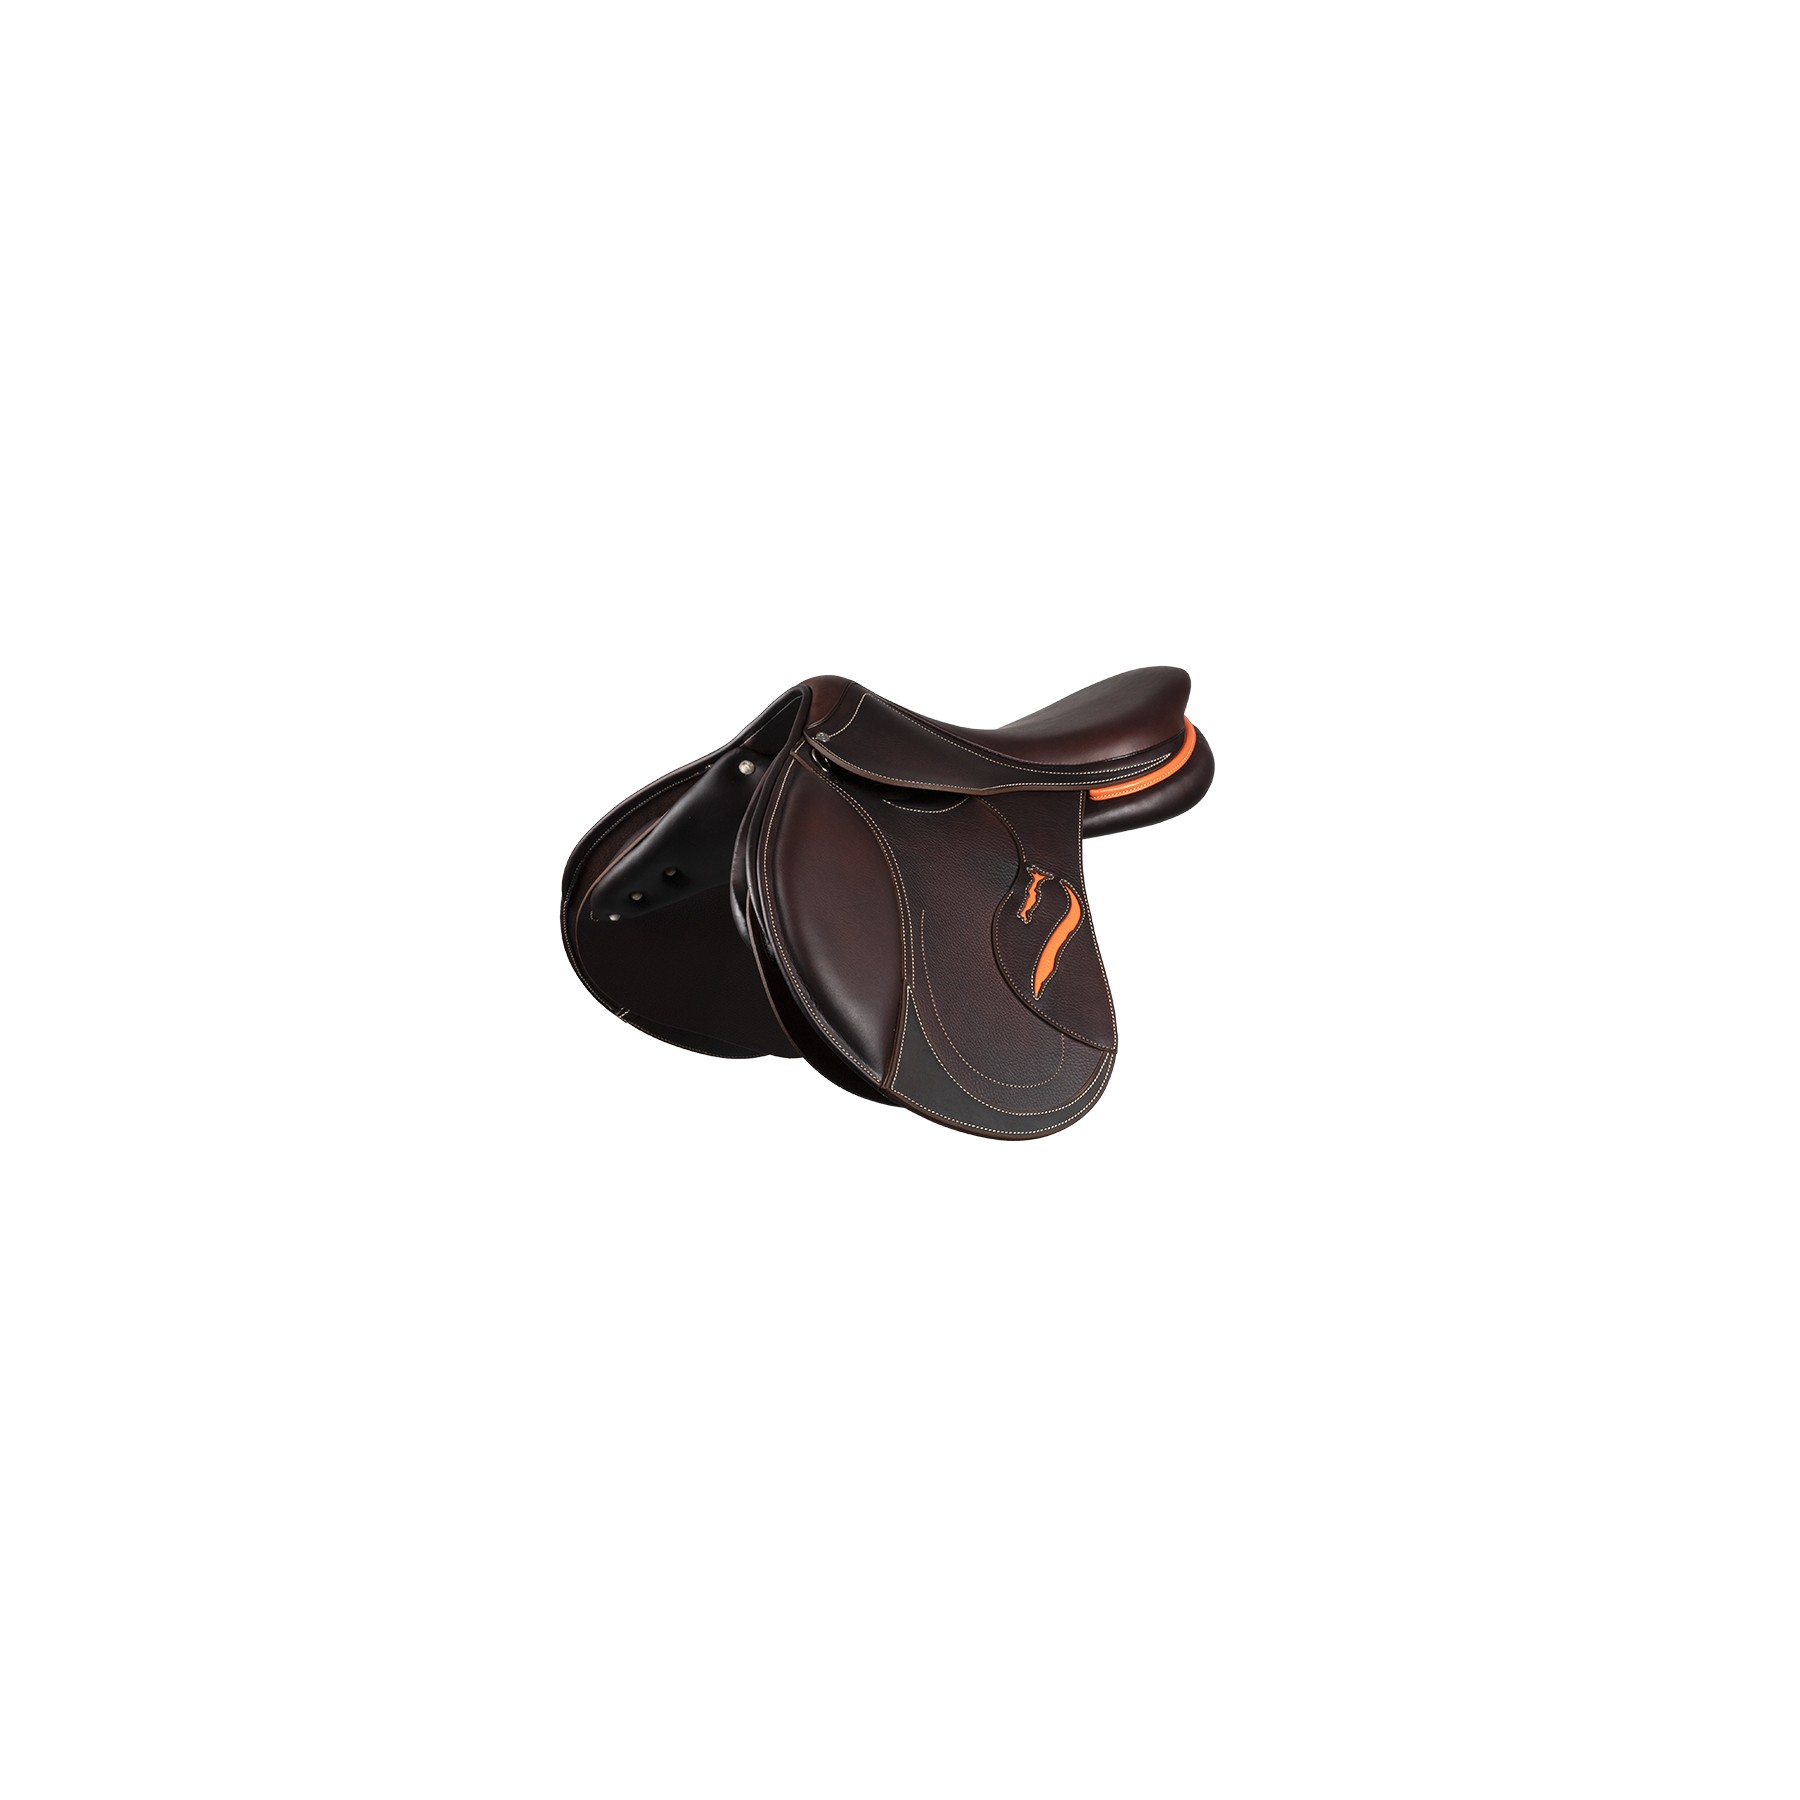 Aiken Tack Exchange - ONLY $1375.00!! 2004 Antares Comfort Close Contact  Jump Saddle, 17.5 Seat, 1 Flap, Wide Tree, Foam Panels    Item Number: 259-3572 Brand